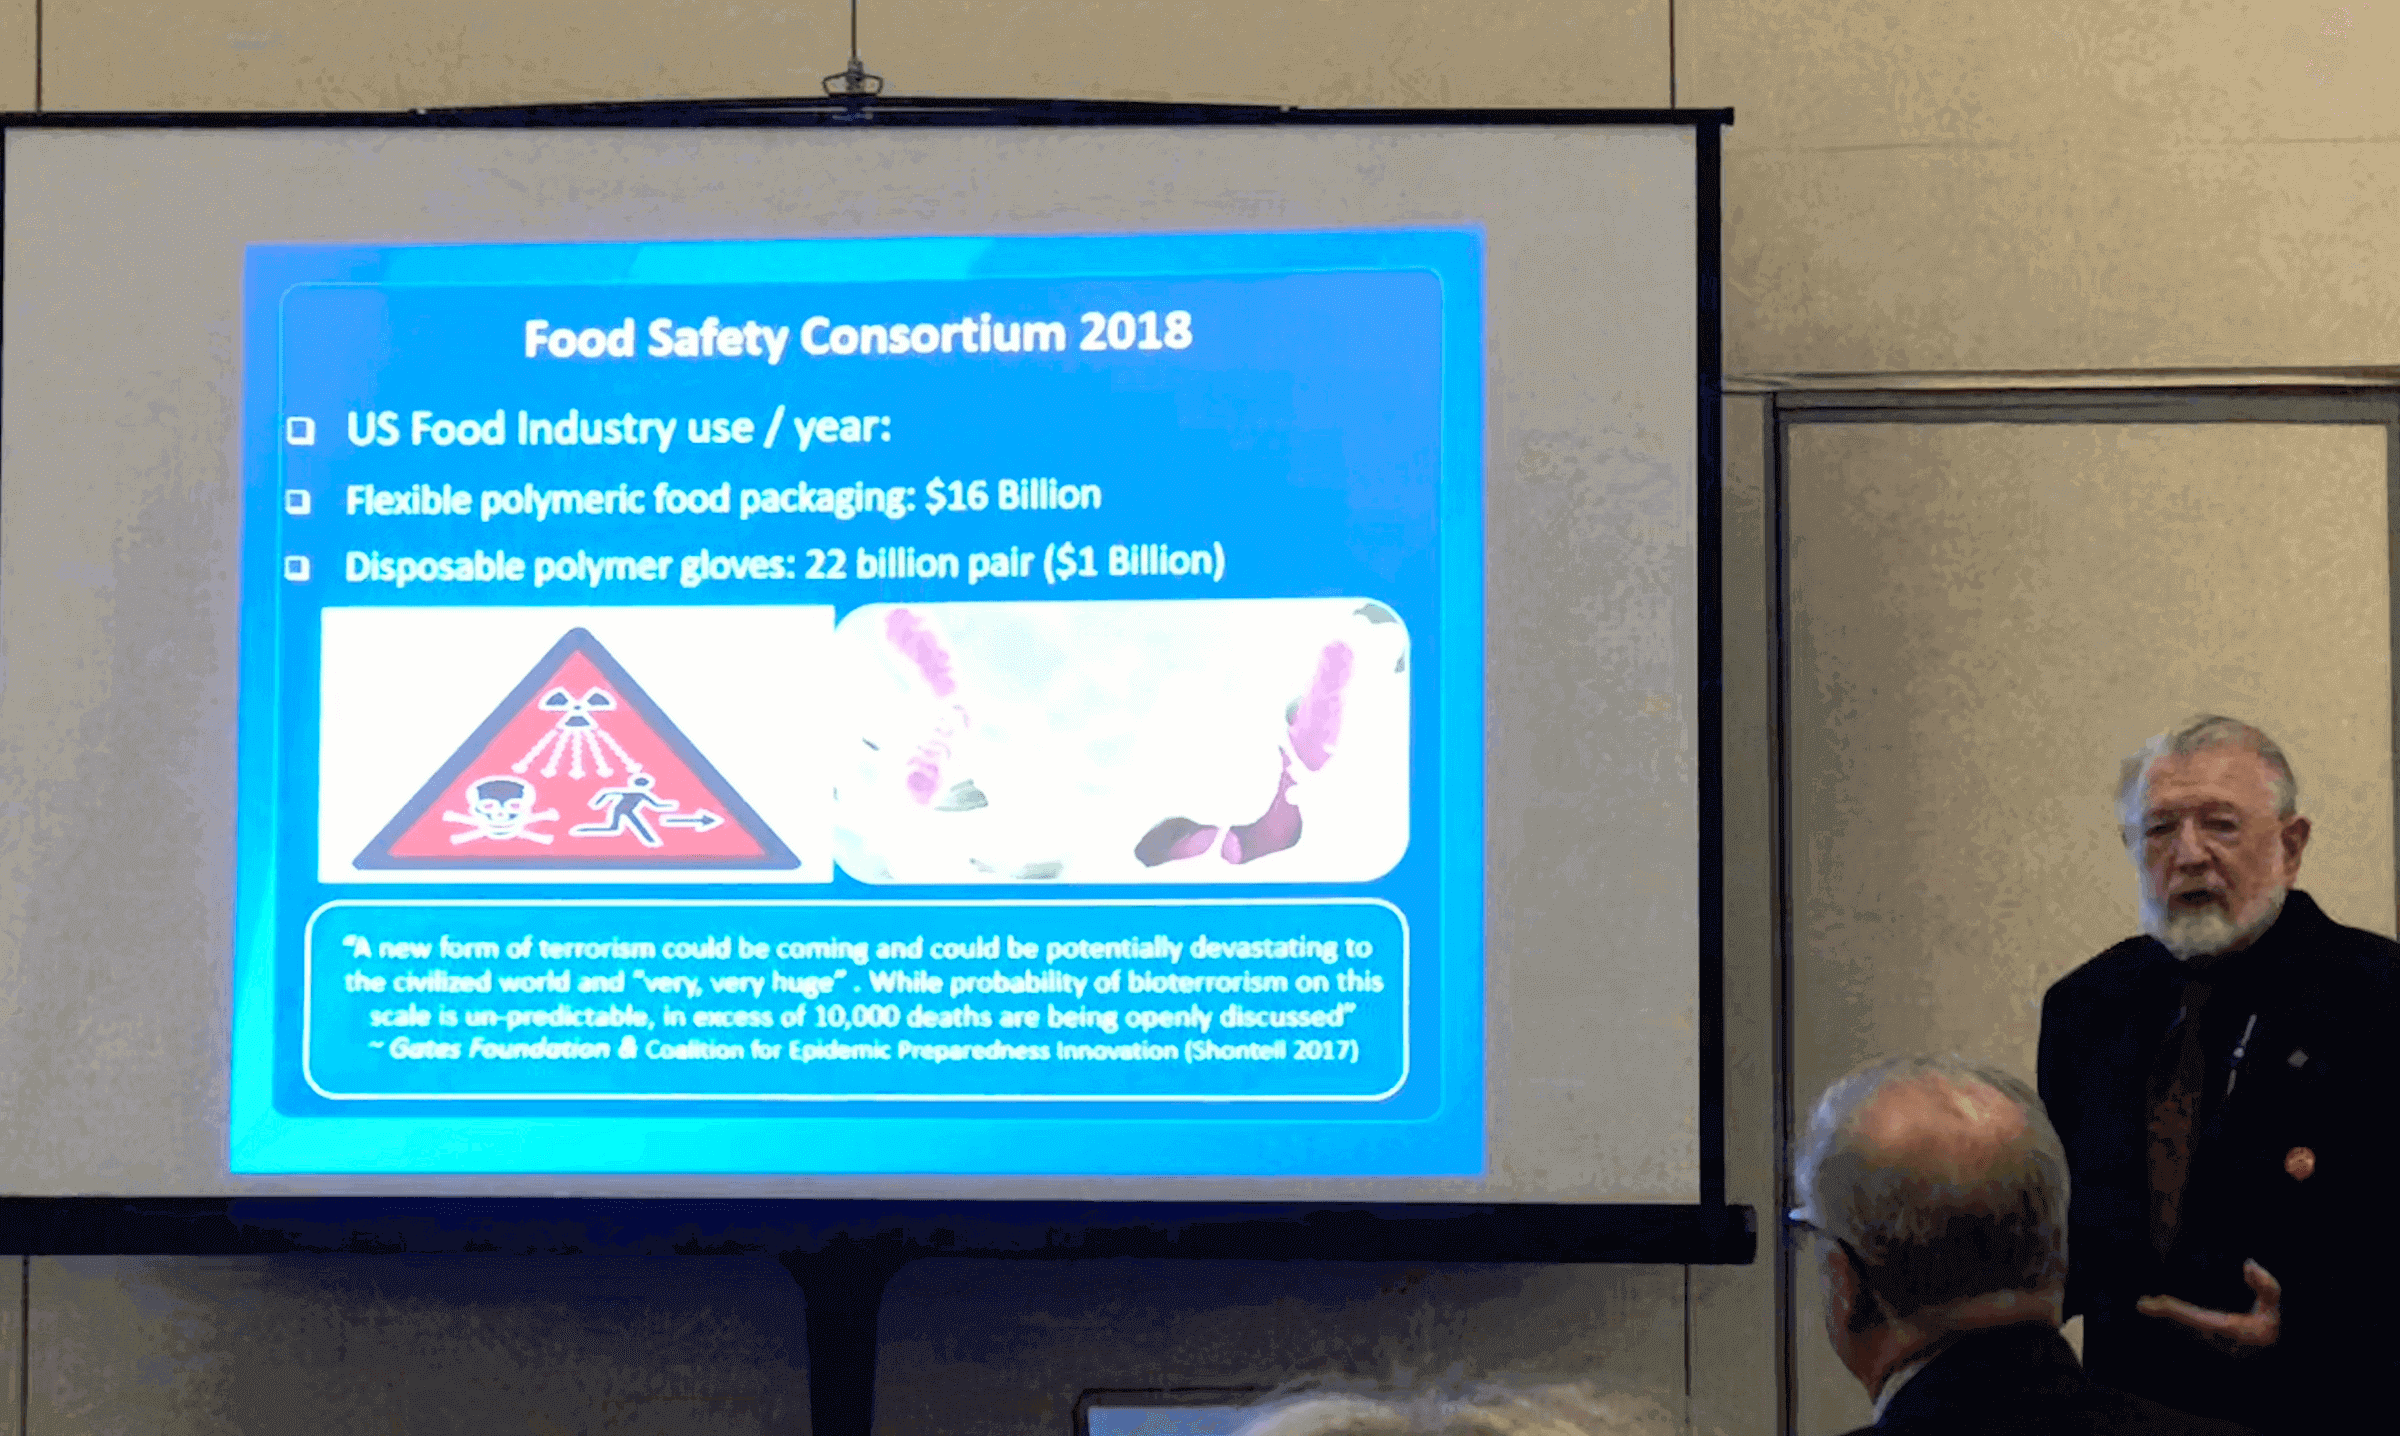 Barry Michaels Presenting Unregulated food polymers